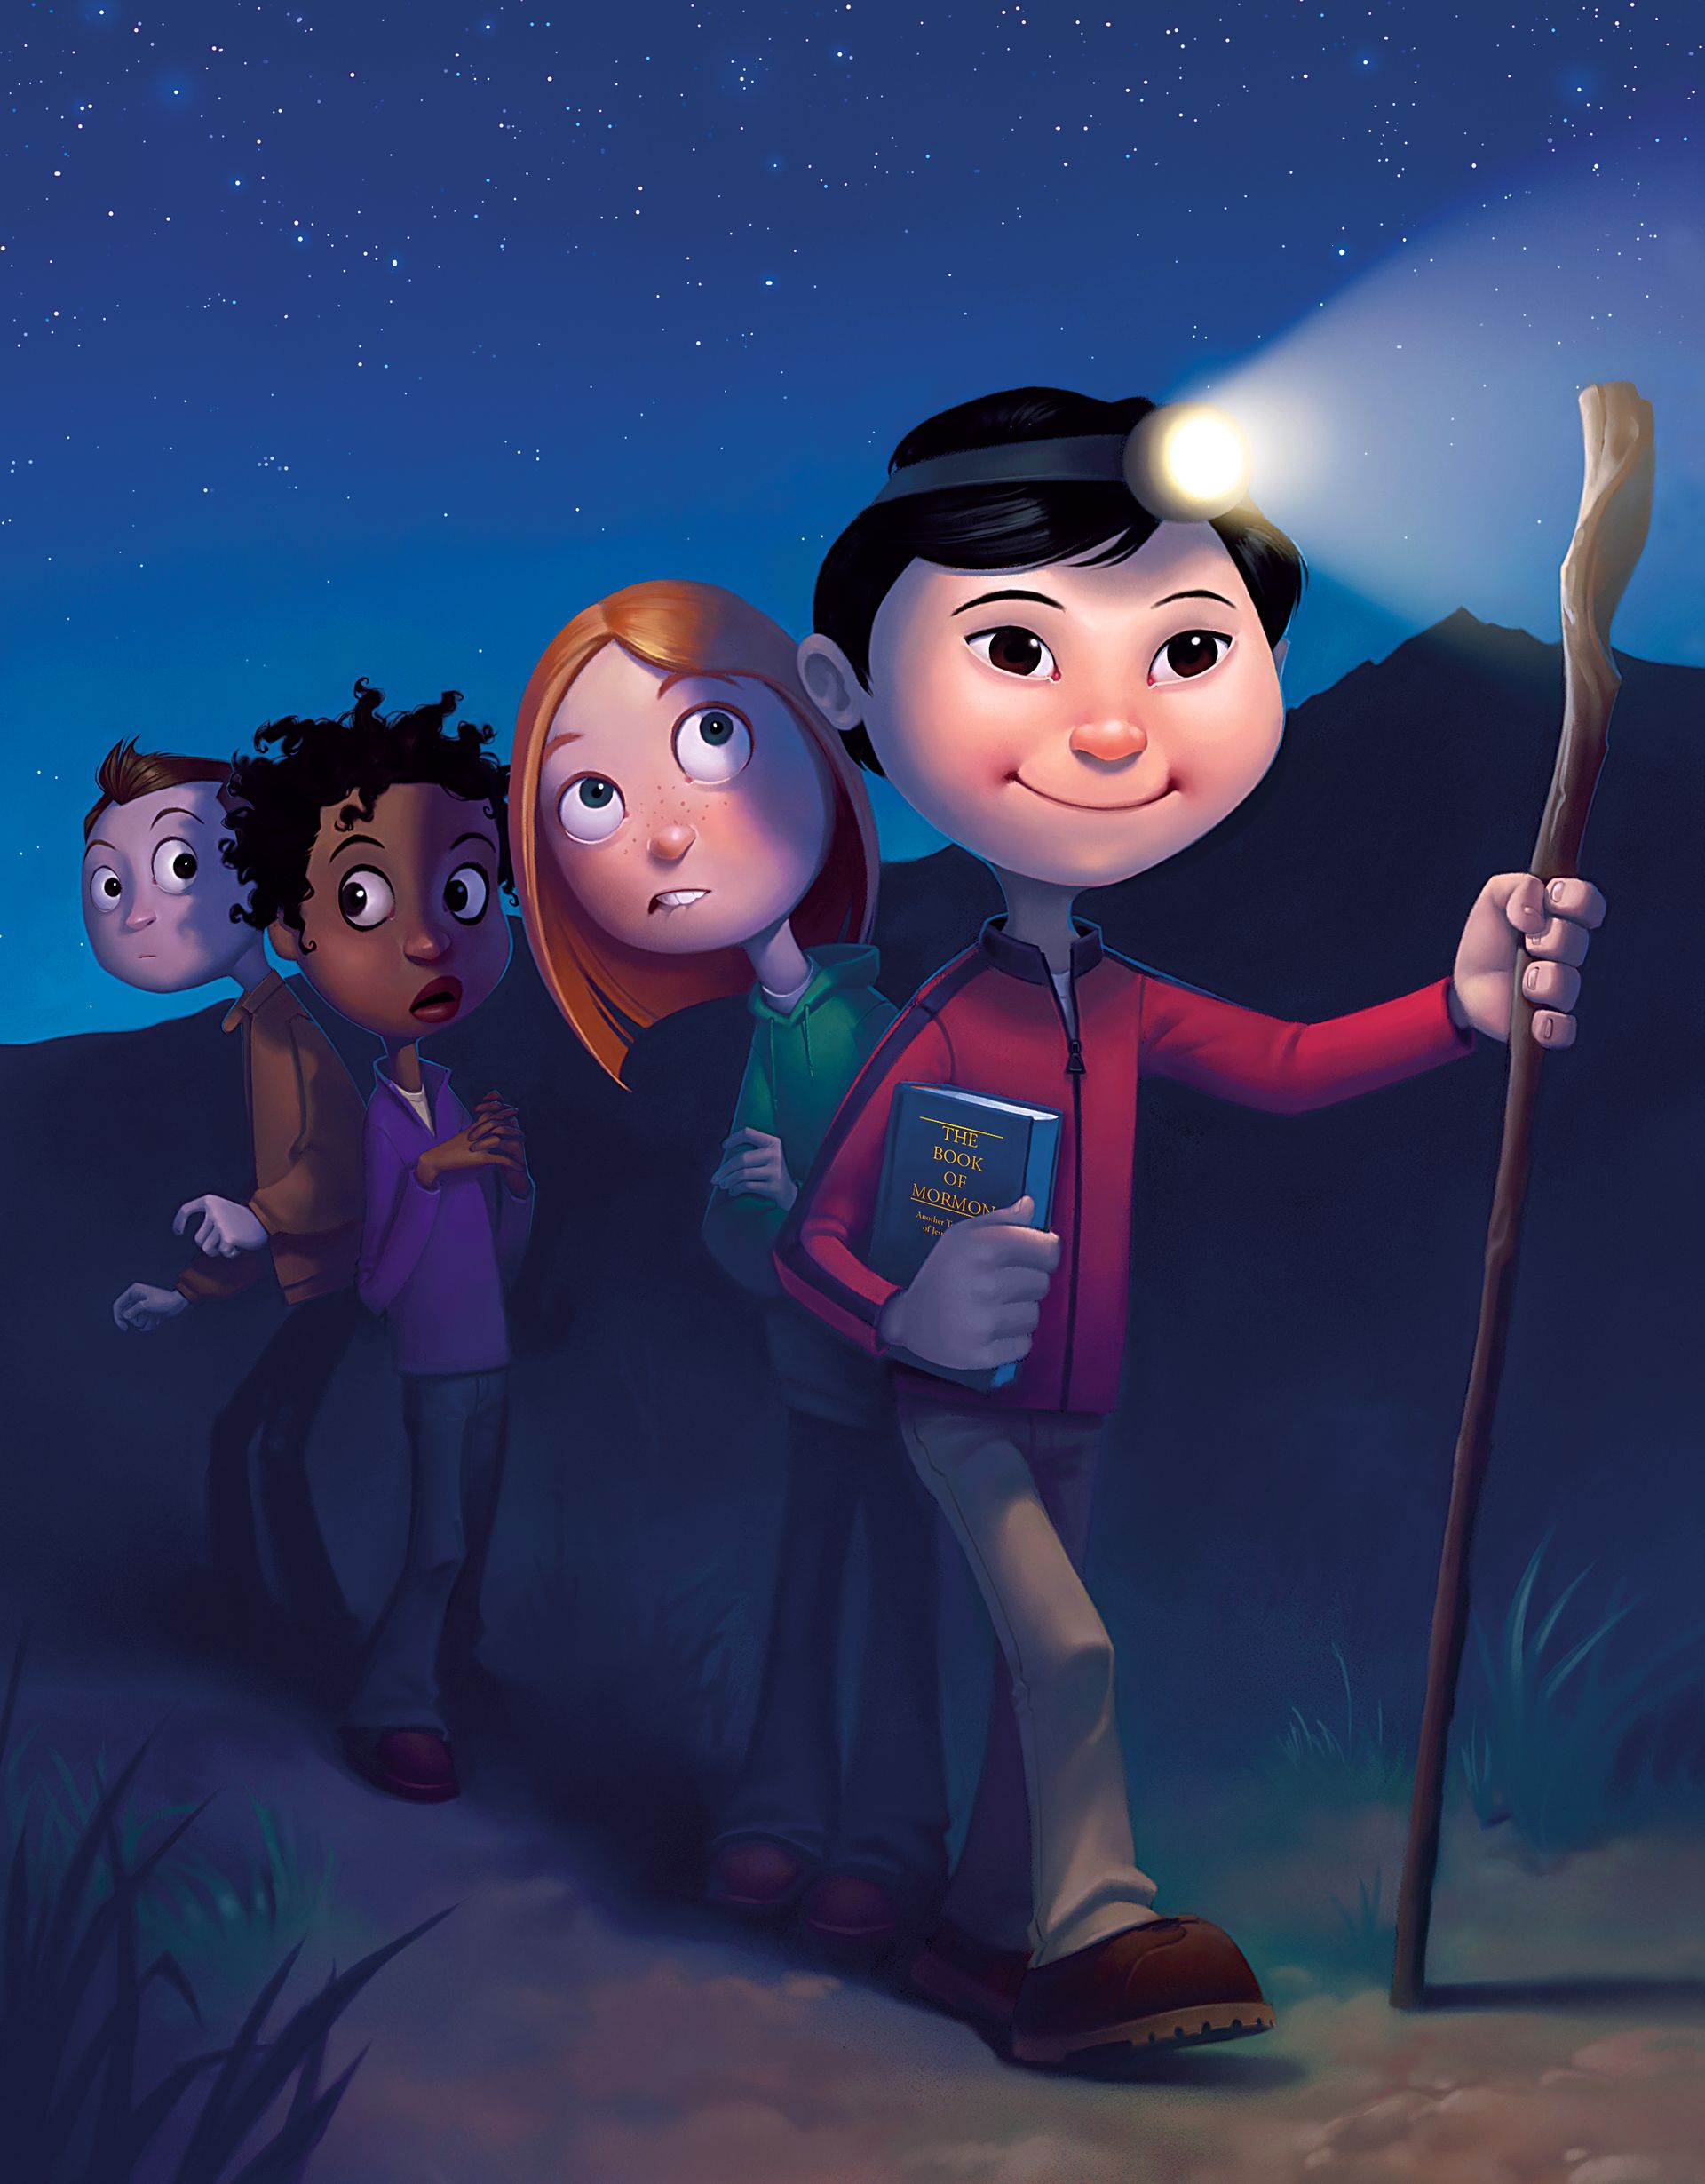 A young woman wearing a headlamp and carrying a Book of Mormon leads a group of children in the dark.